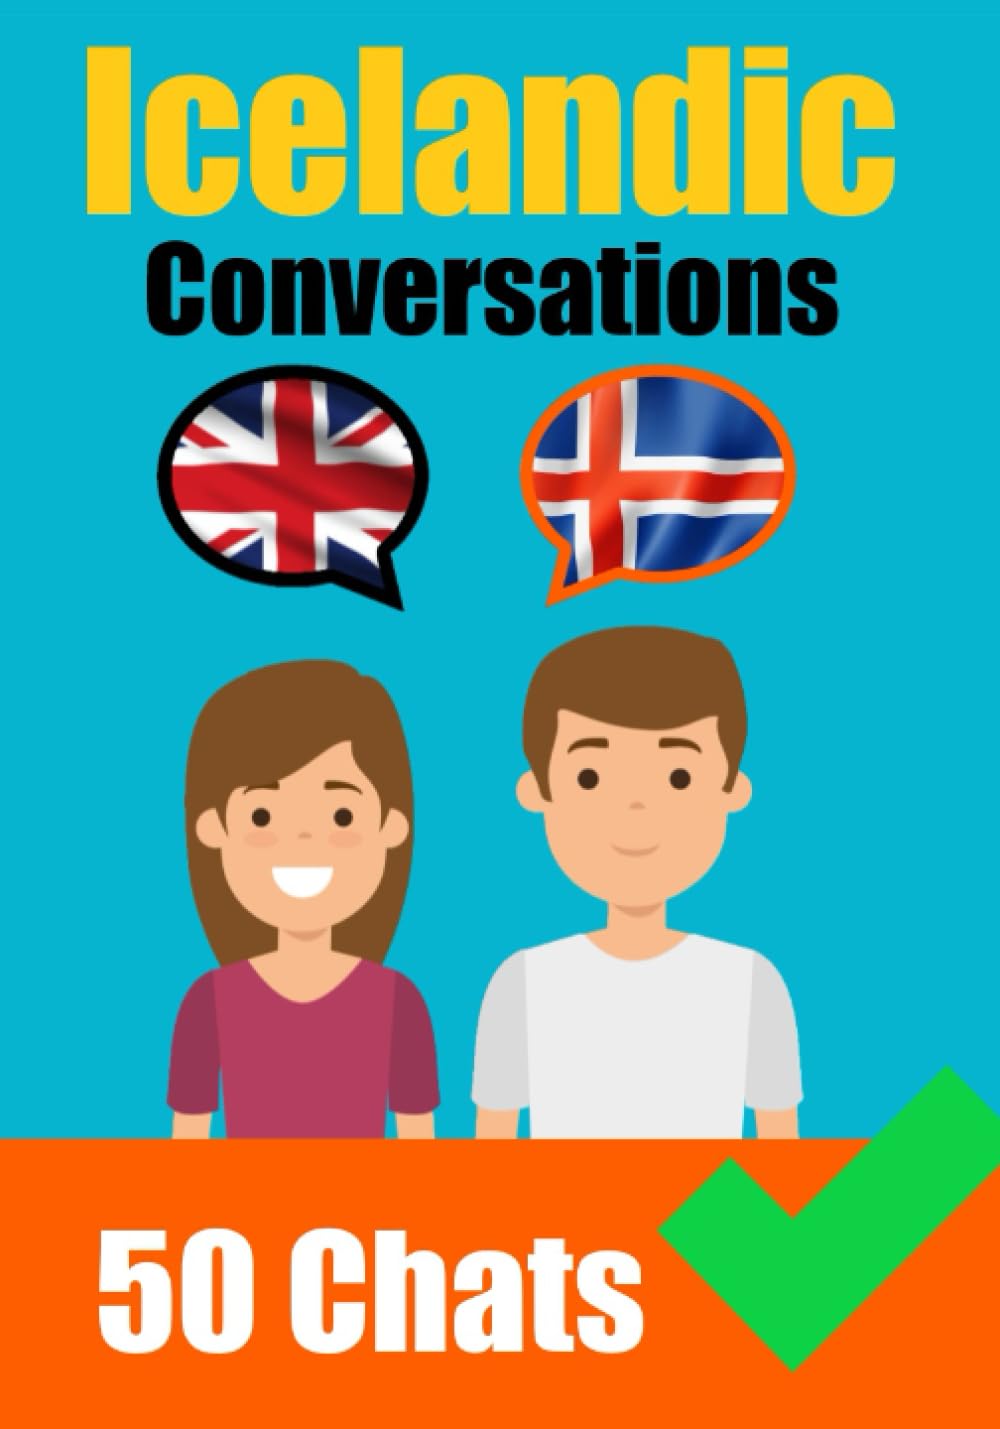 Conversations in Icelandic | English and Icelandic Conversations Side by Side - Skriuwer.com